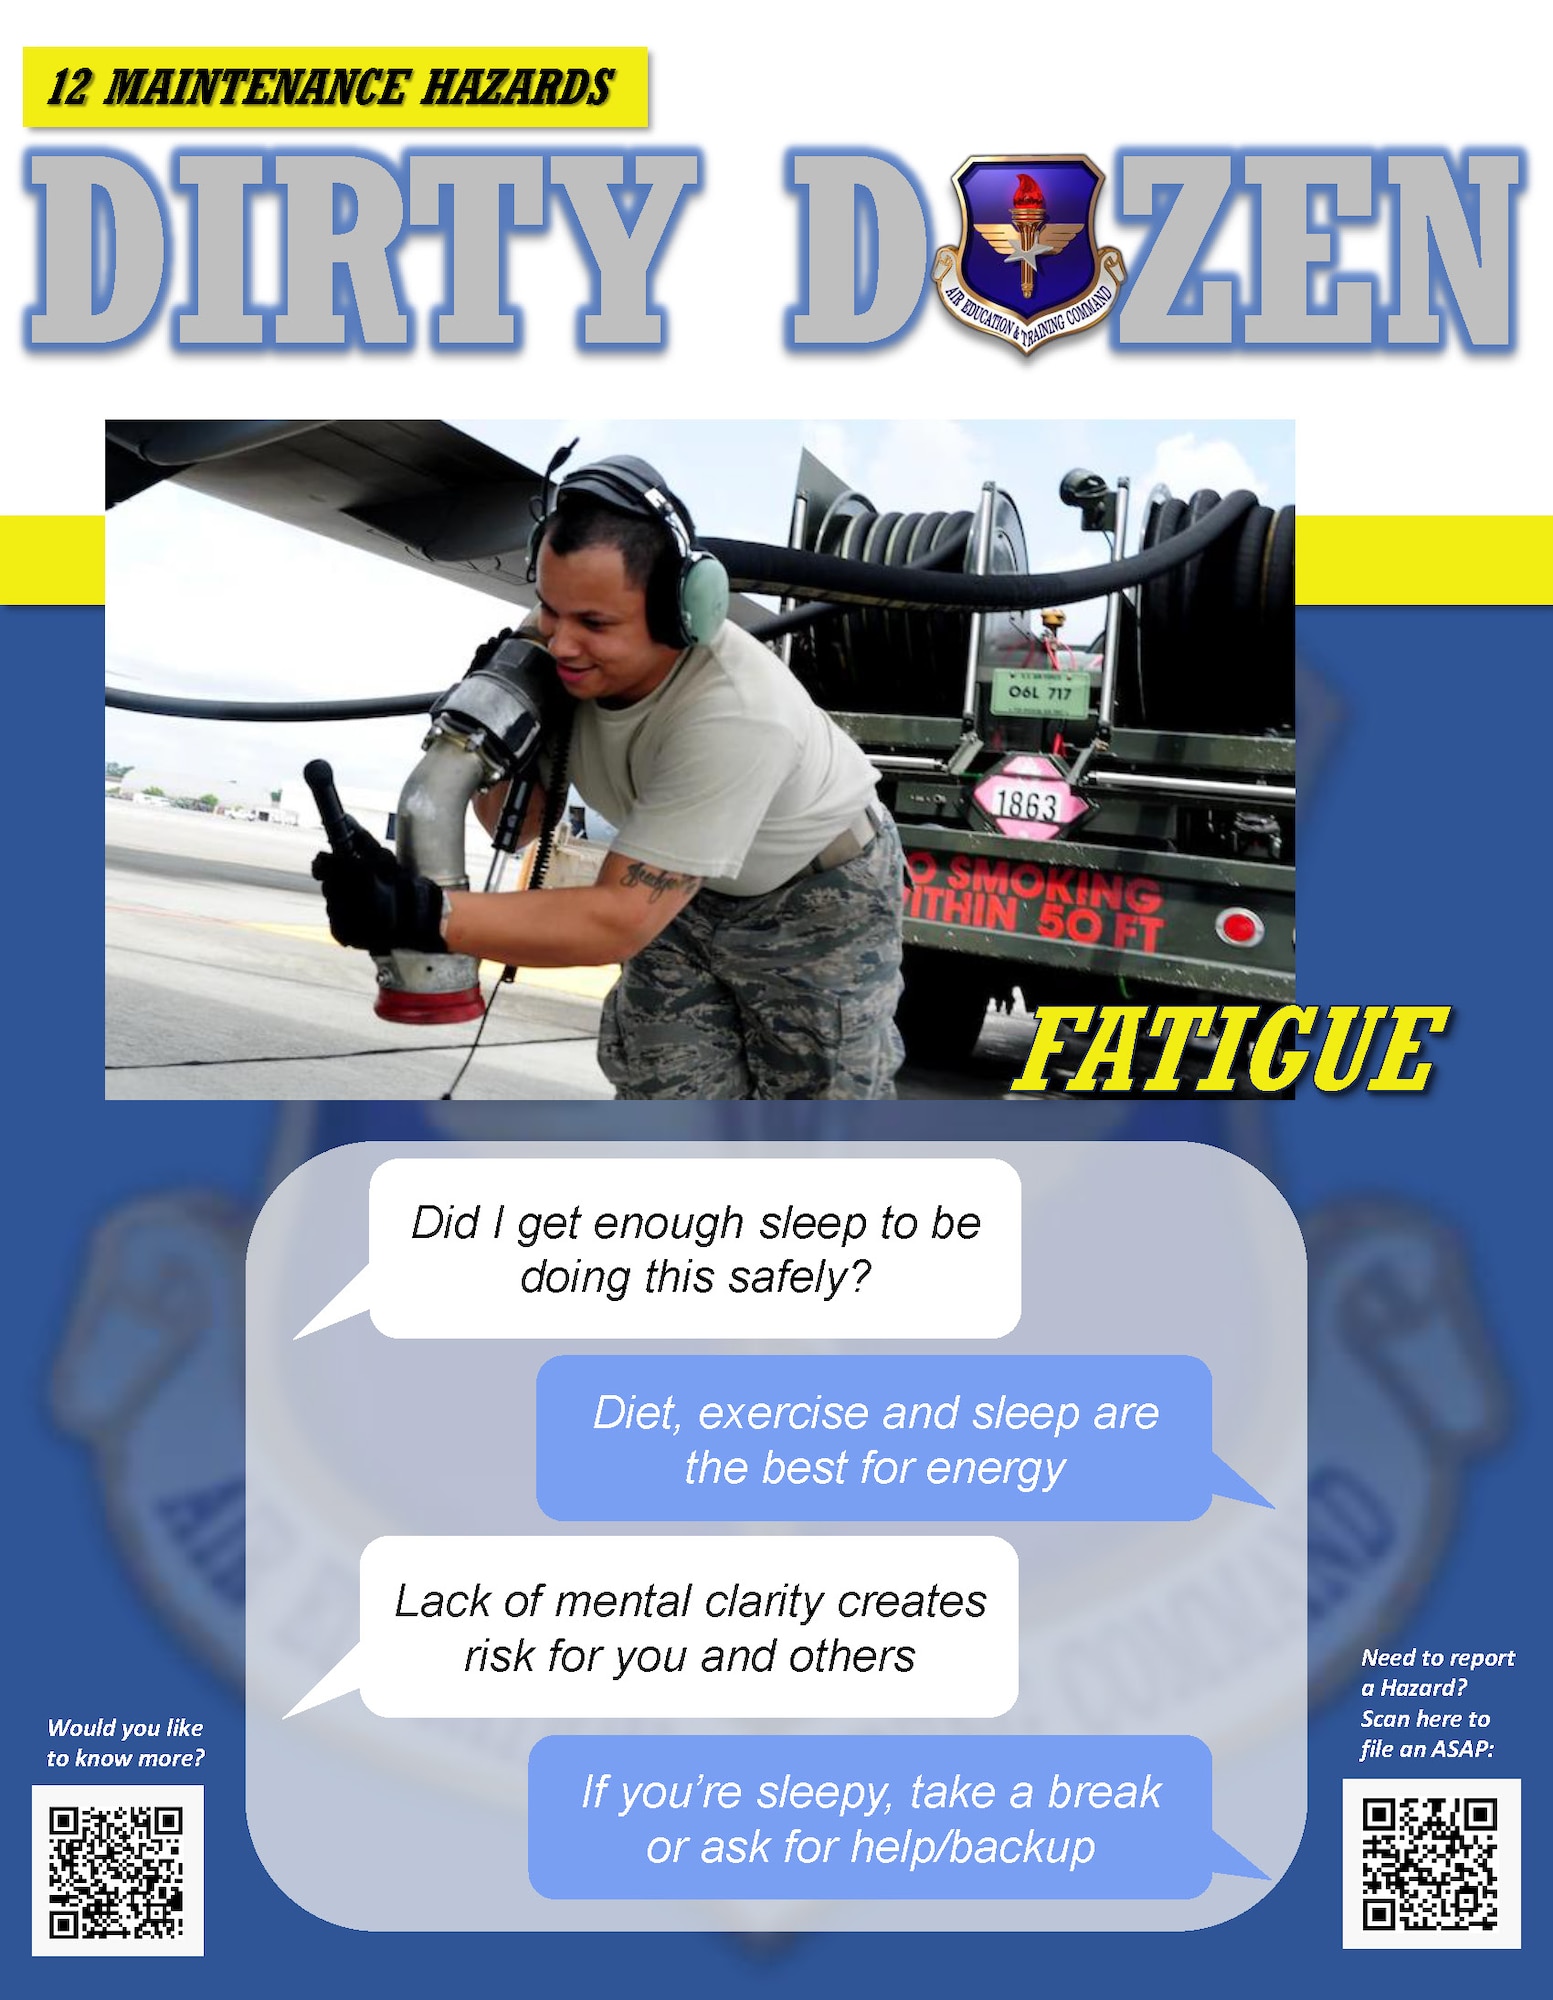 Fatigue is one of the Dirty Dozen, which highlights common human error factors in aircraft maintenance mishaps.